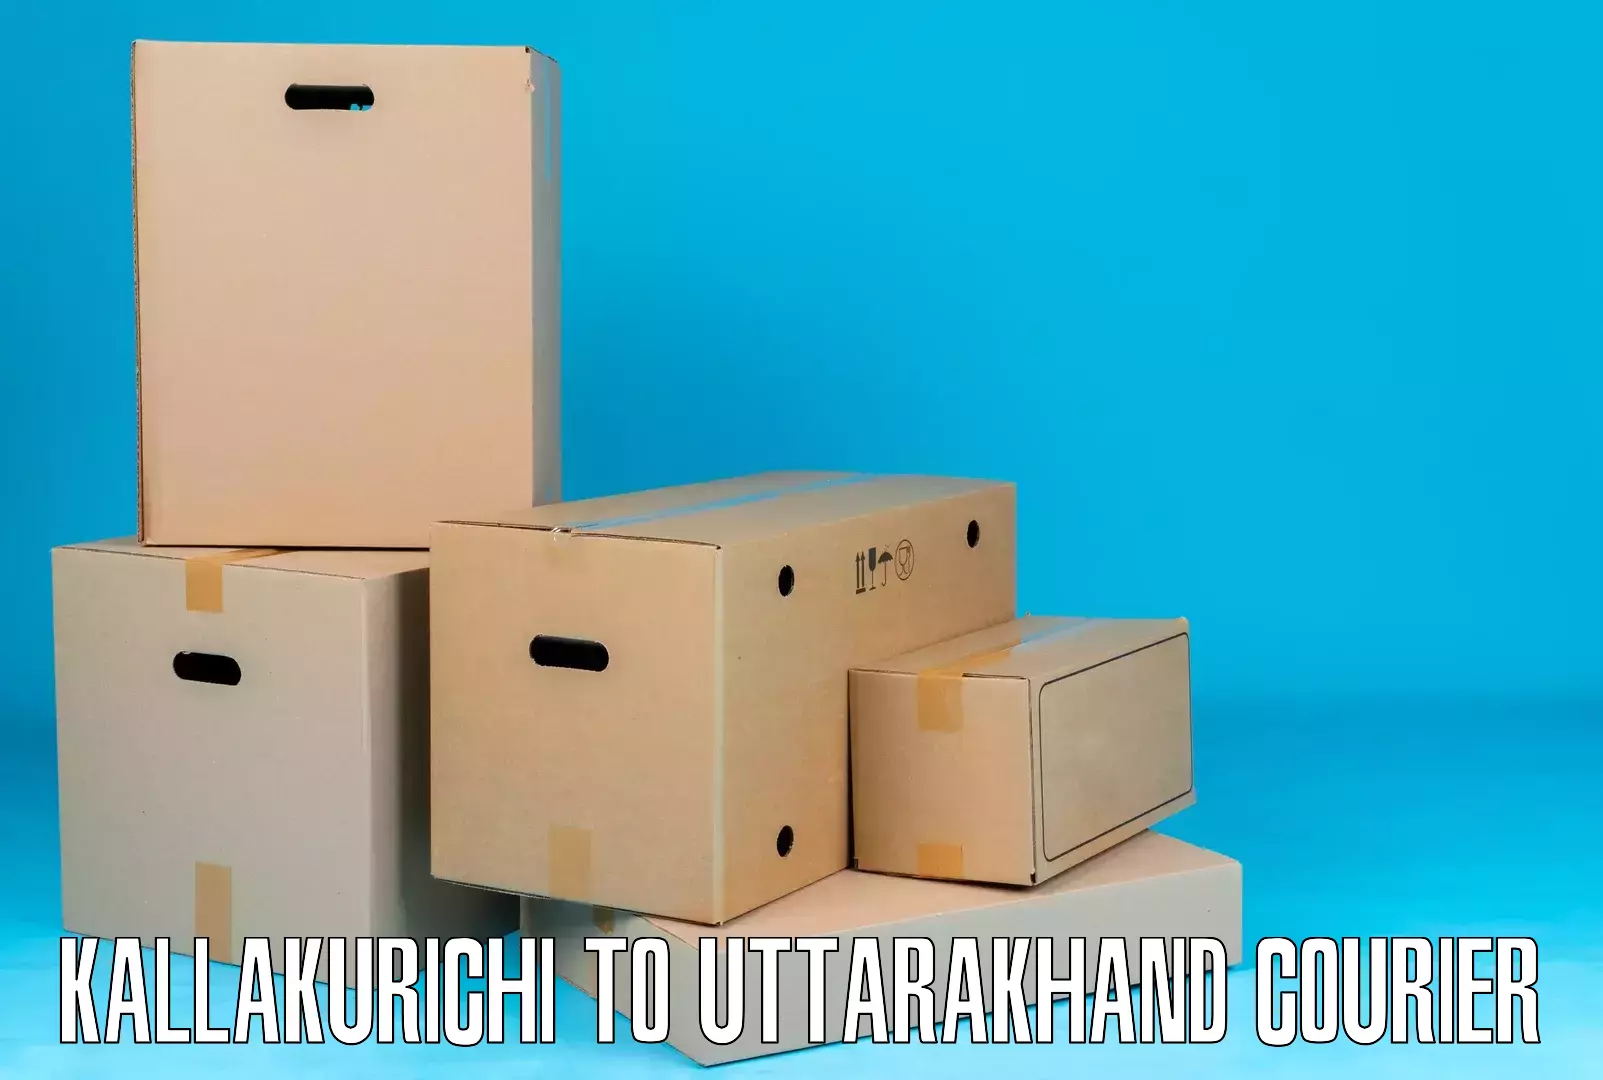 End-to-end delivery in Kallakurichi to Dehradun